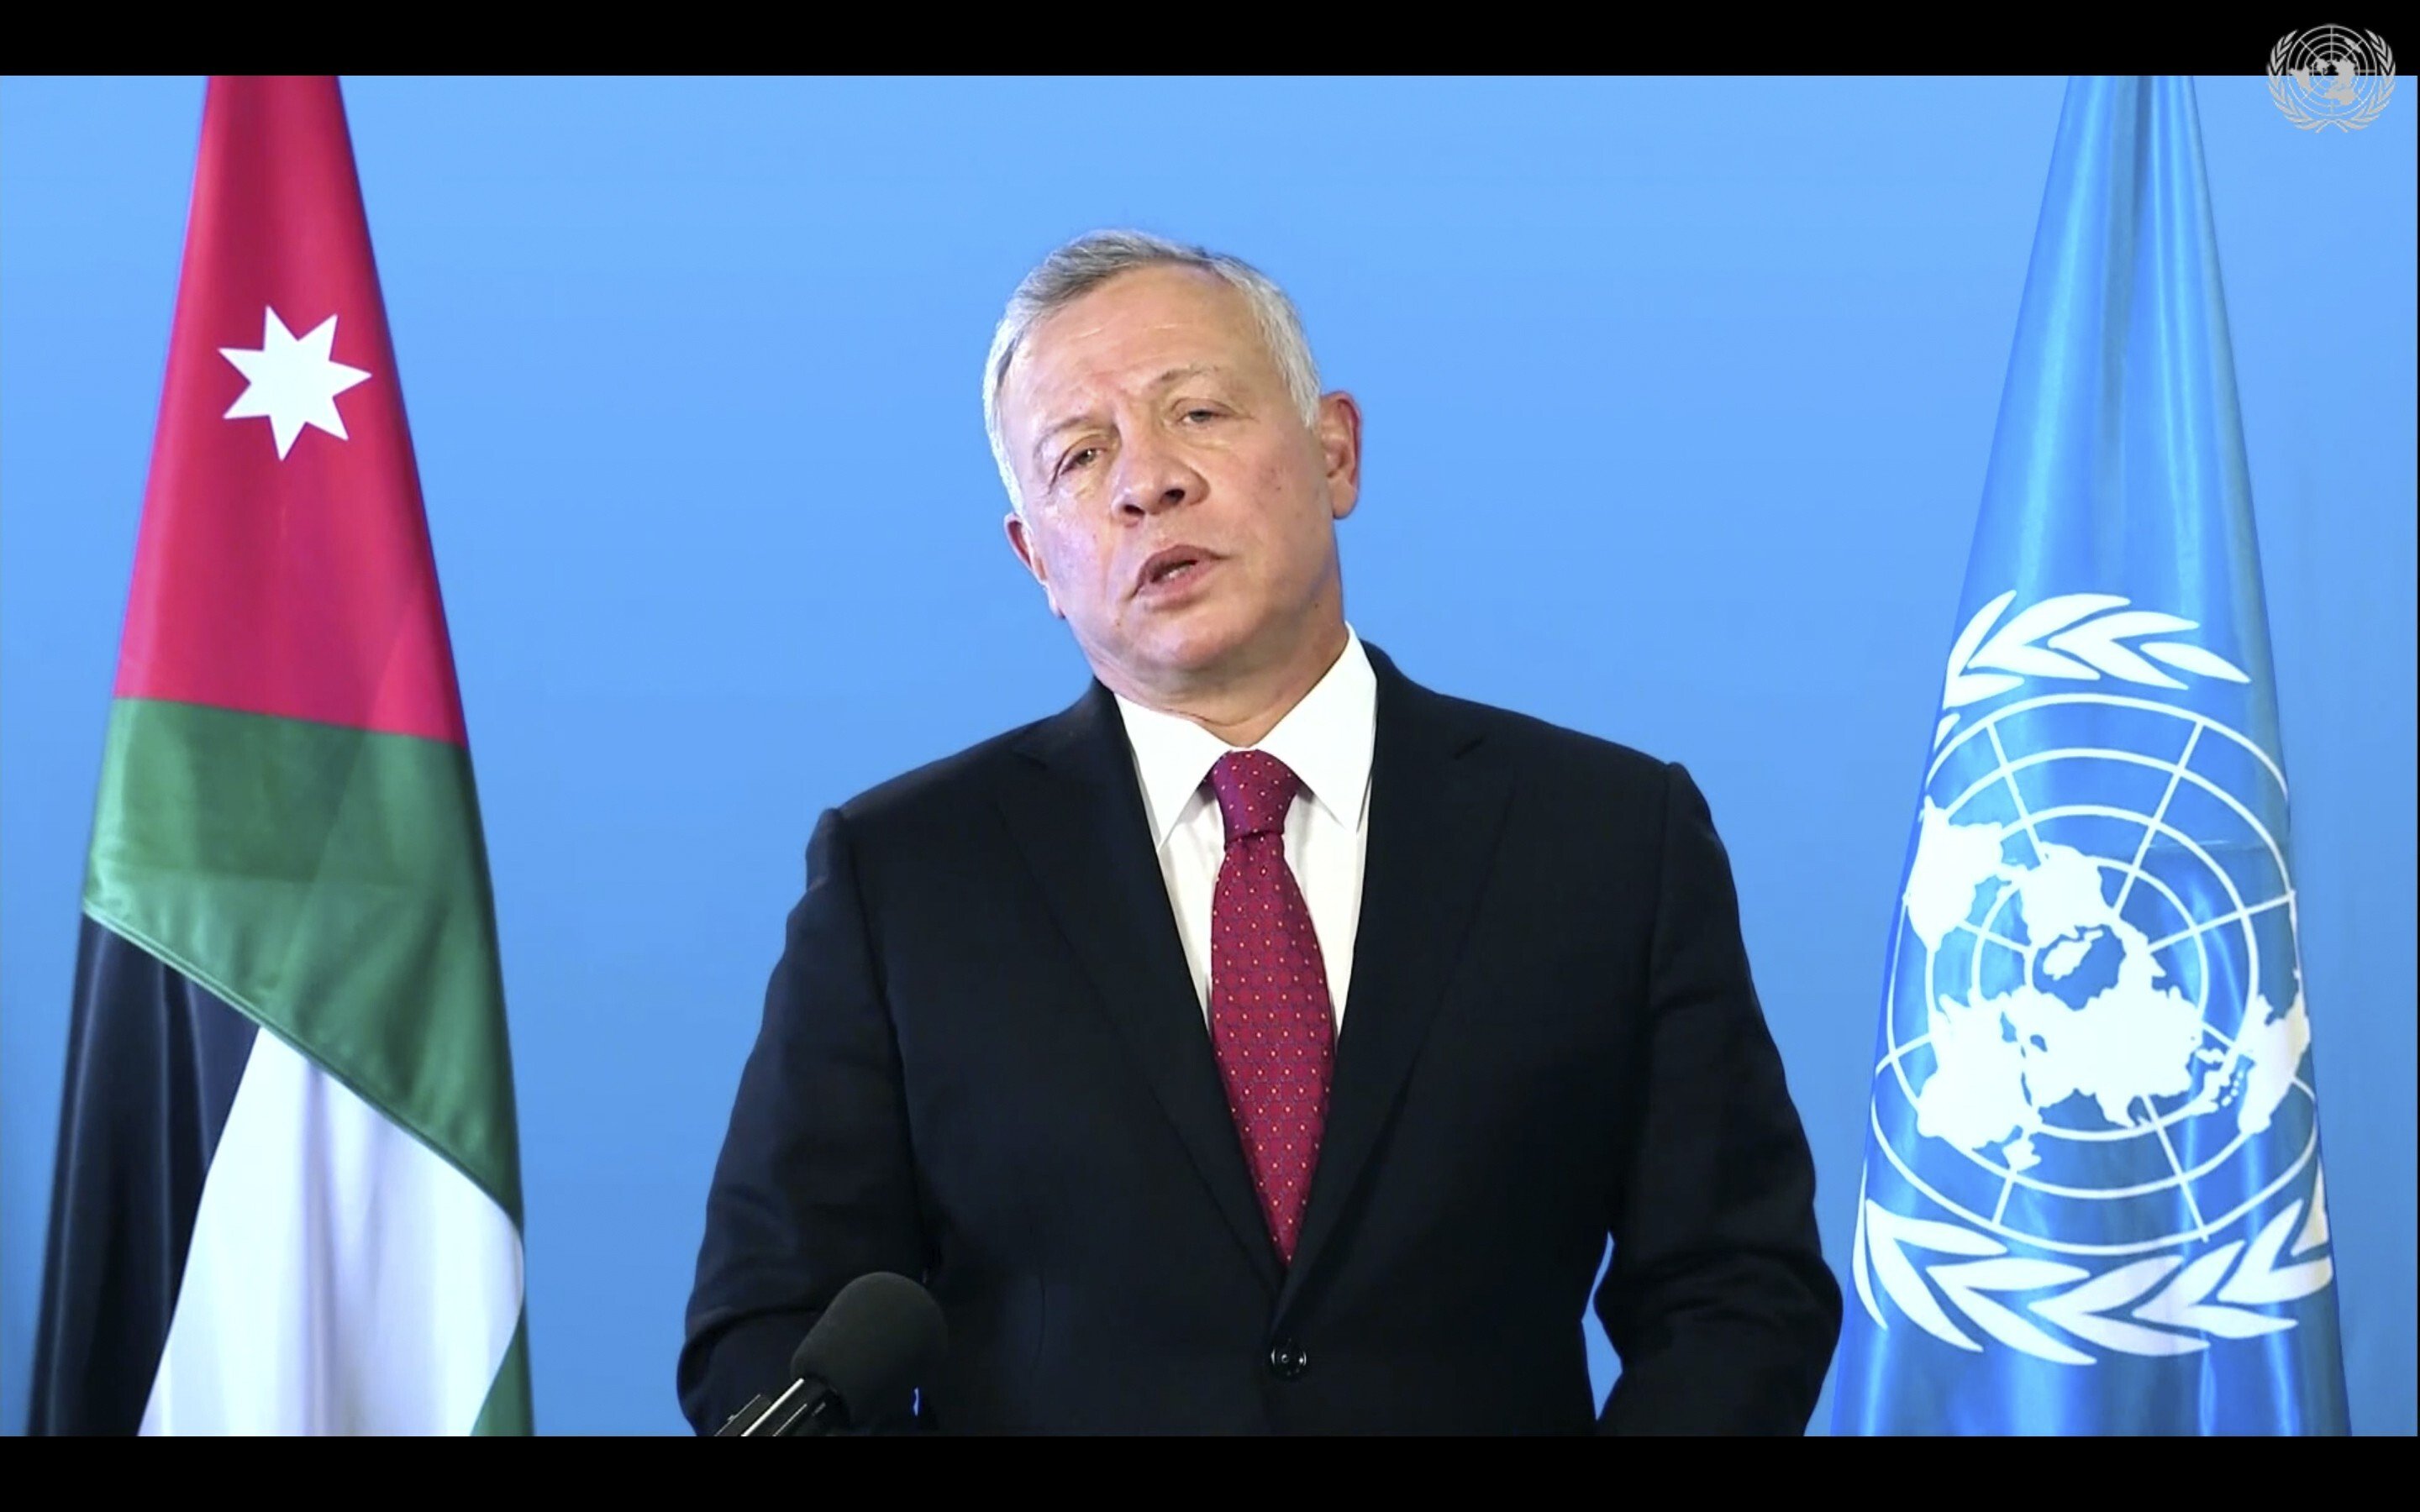 King Abdullah II of Jordan denied any impropriety, citing security needs for keeping the transactions quiet. No public funds were used, the royal court said. Photo: UN Web TV via AP